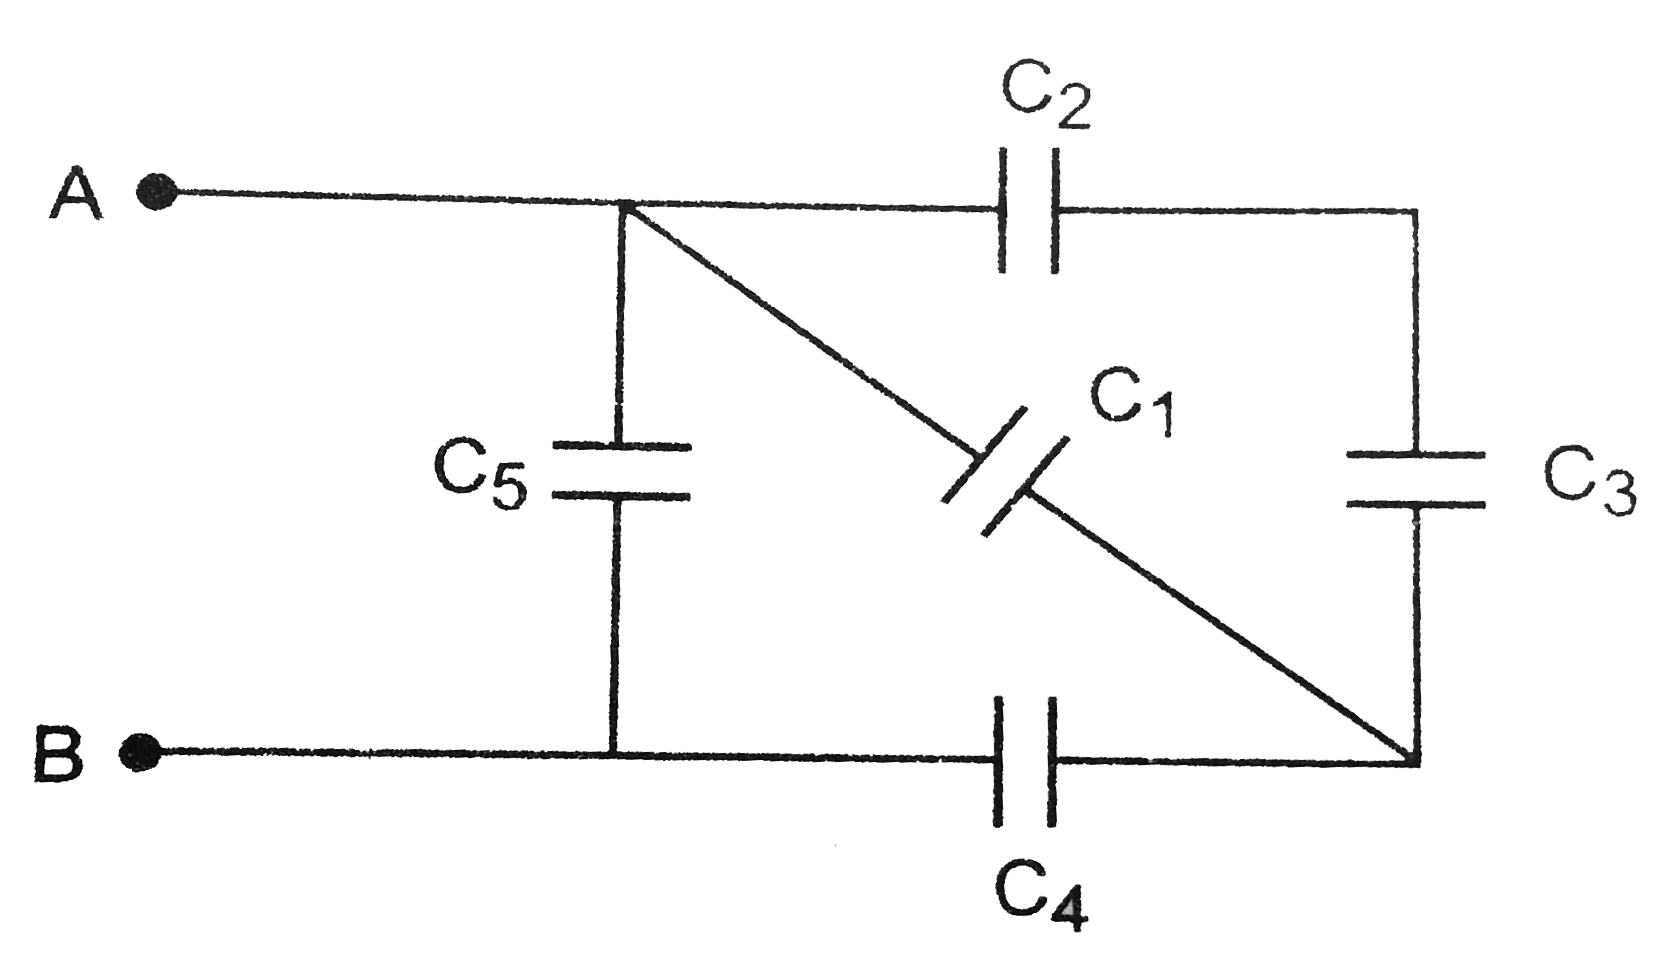 Five capacitors of capacitances  C(1) = C(5) = 1 muF ,  C(2) = C(3) = C(4) = 2 muF are connectes as shown in Fig. Calculate equivalent capacitance of the system between  points A and B.